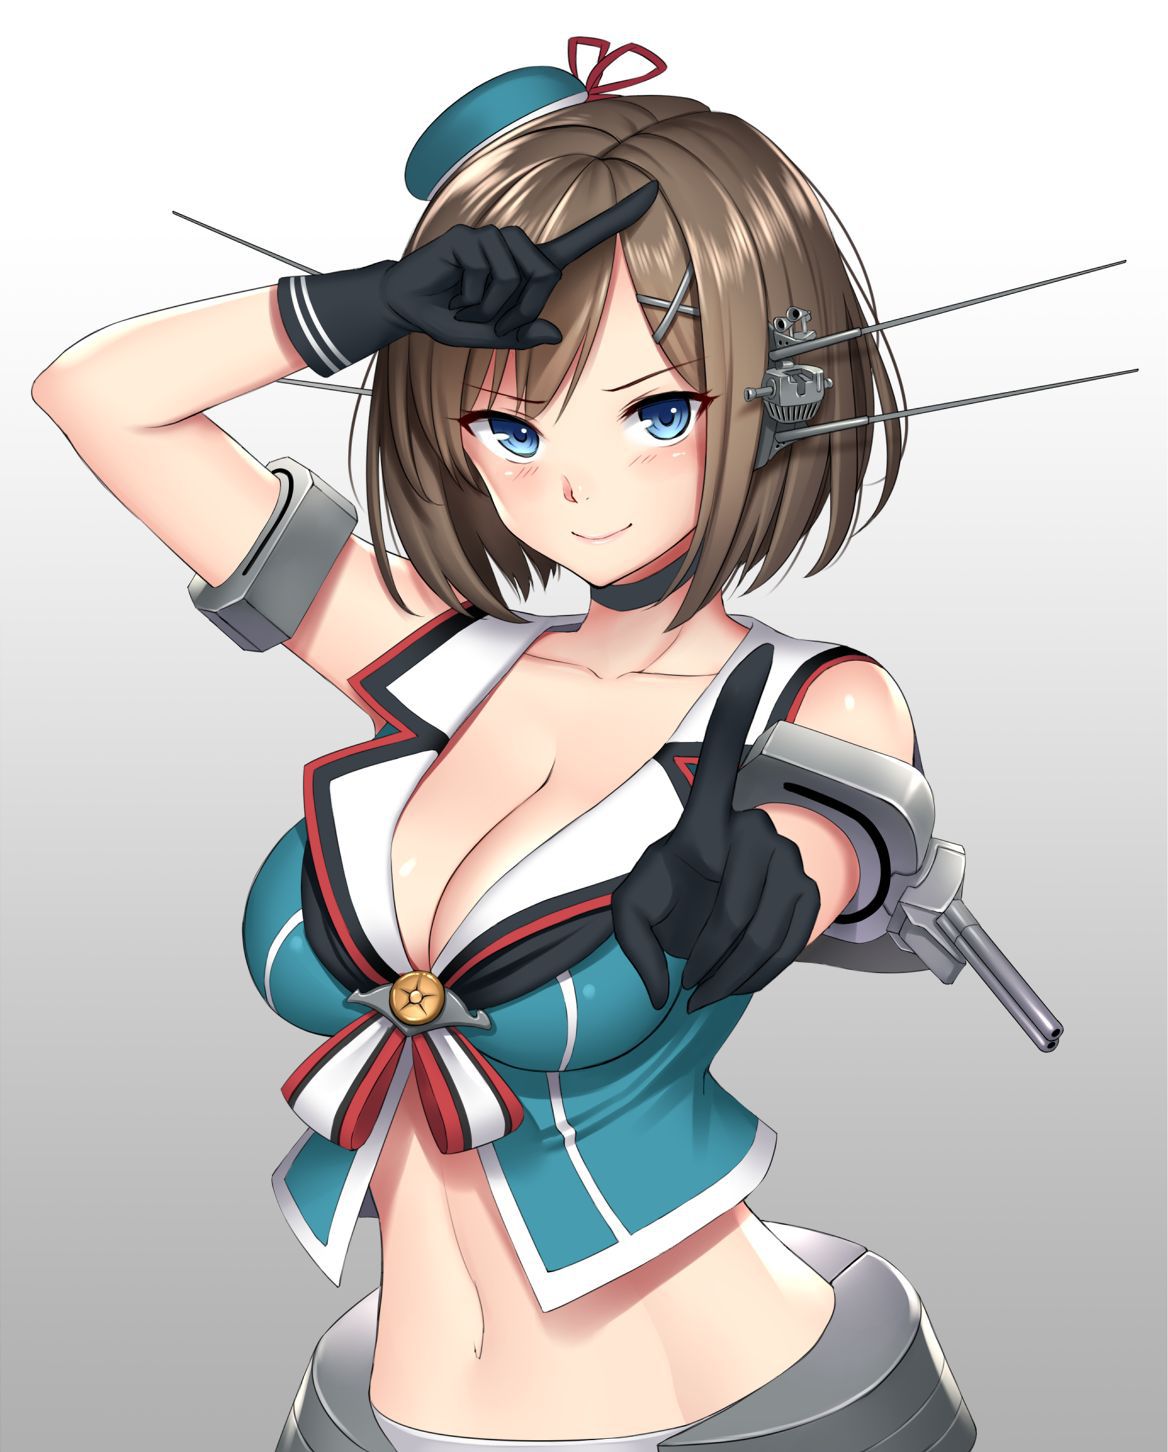 Do you want to see a naughty image of Kantai? 9